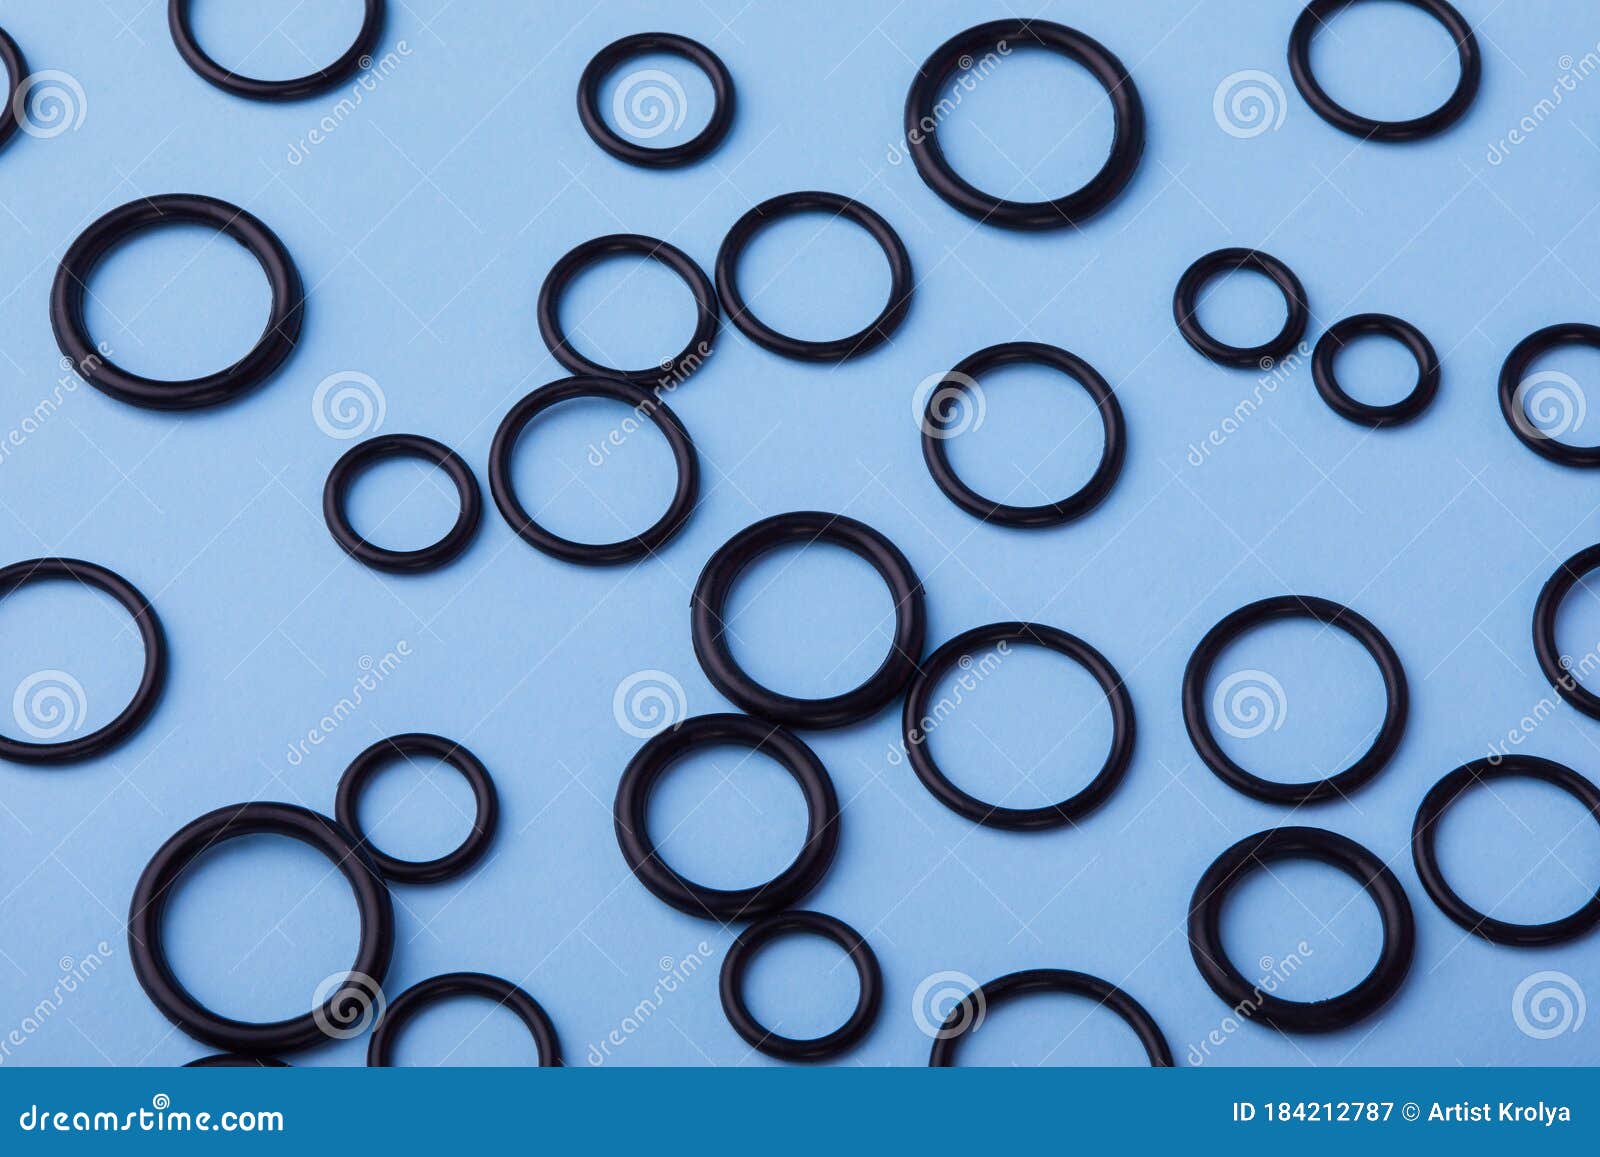 How Does an O-Ring Work? | Allied Metrics O-Rings & Seals, Inc.